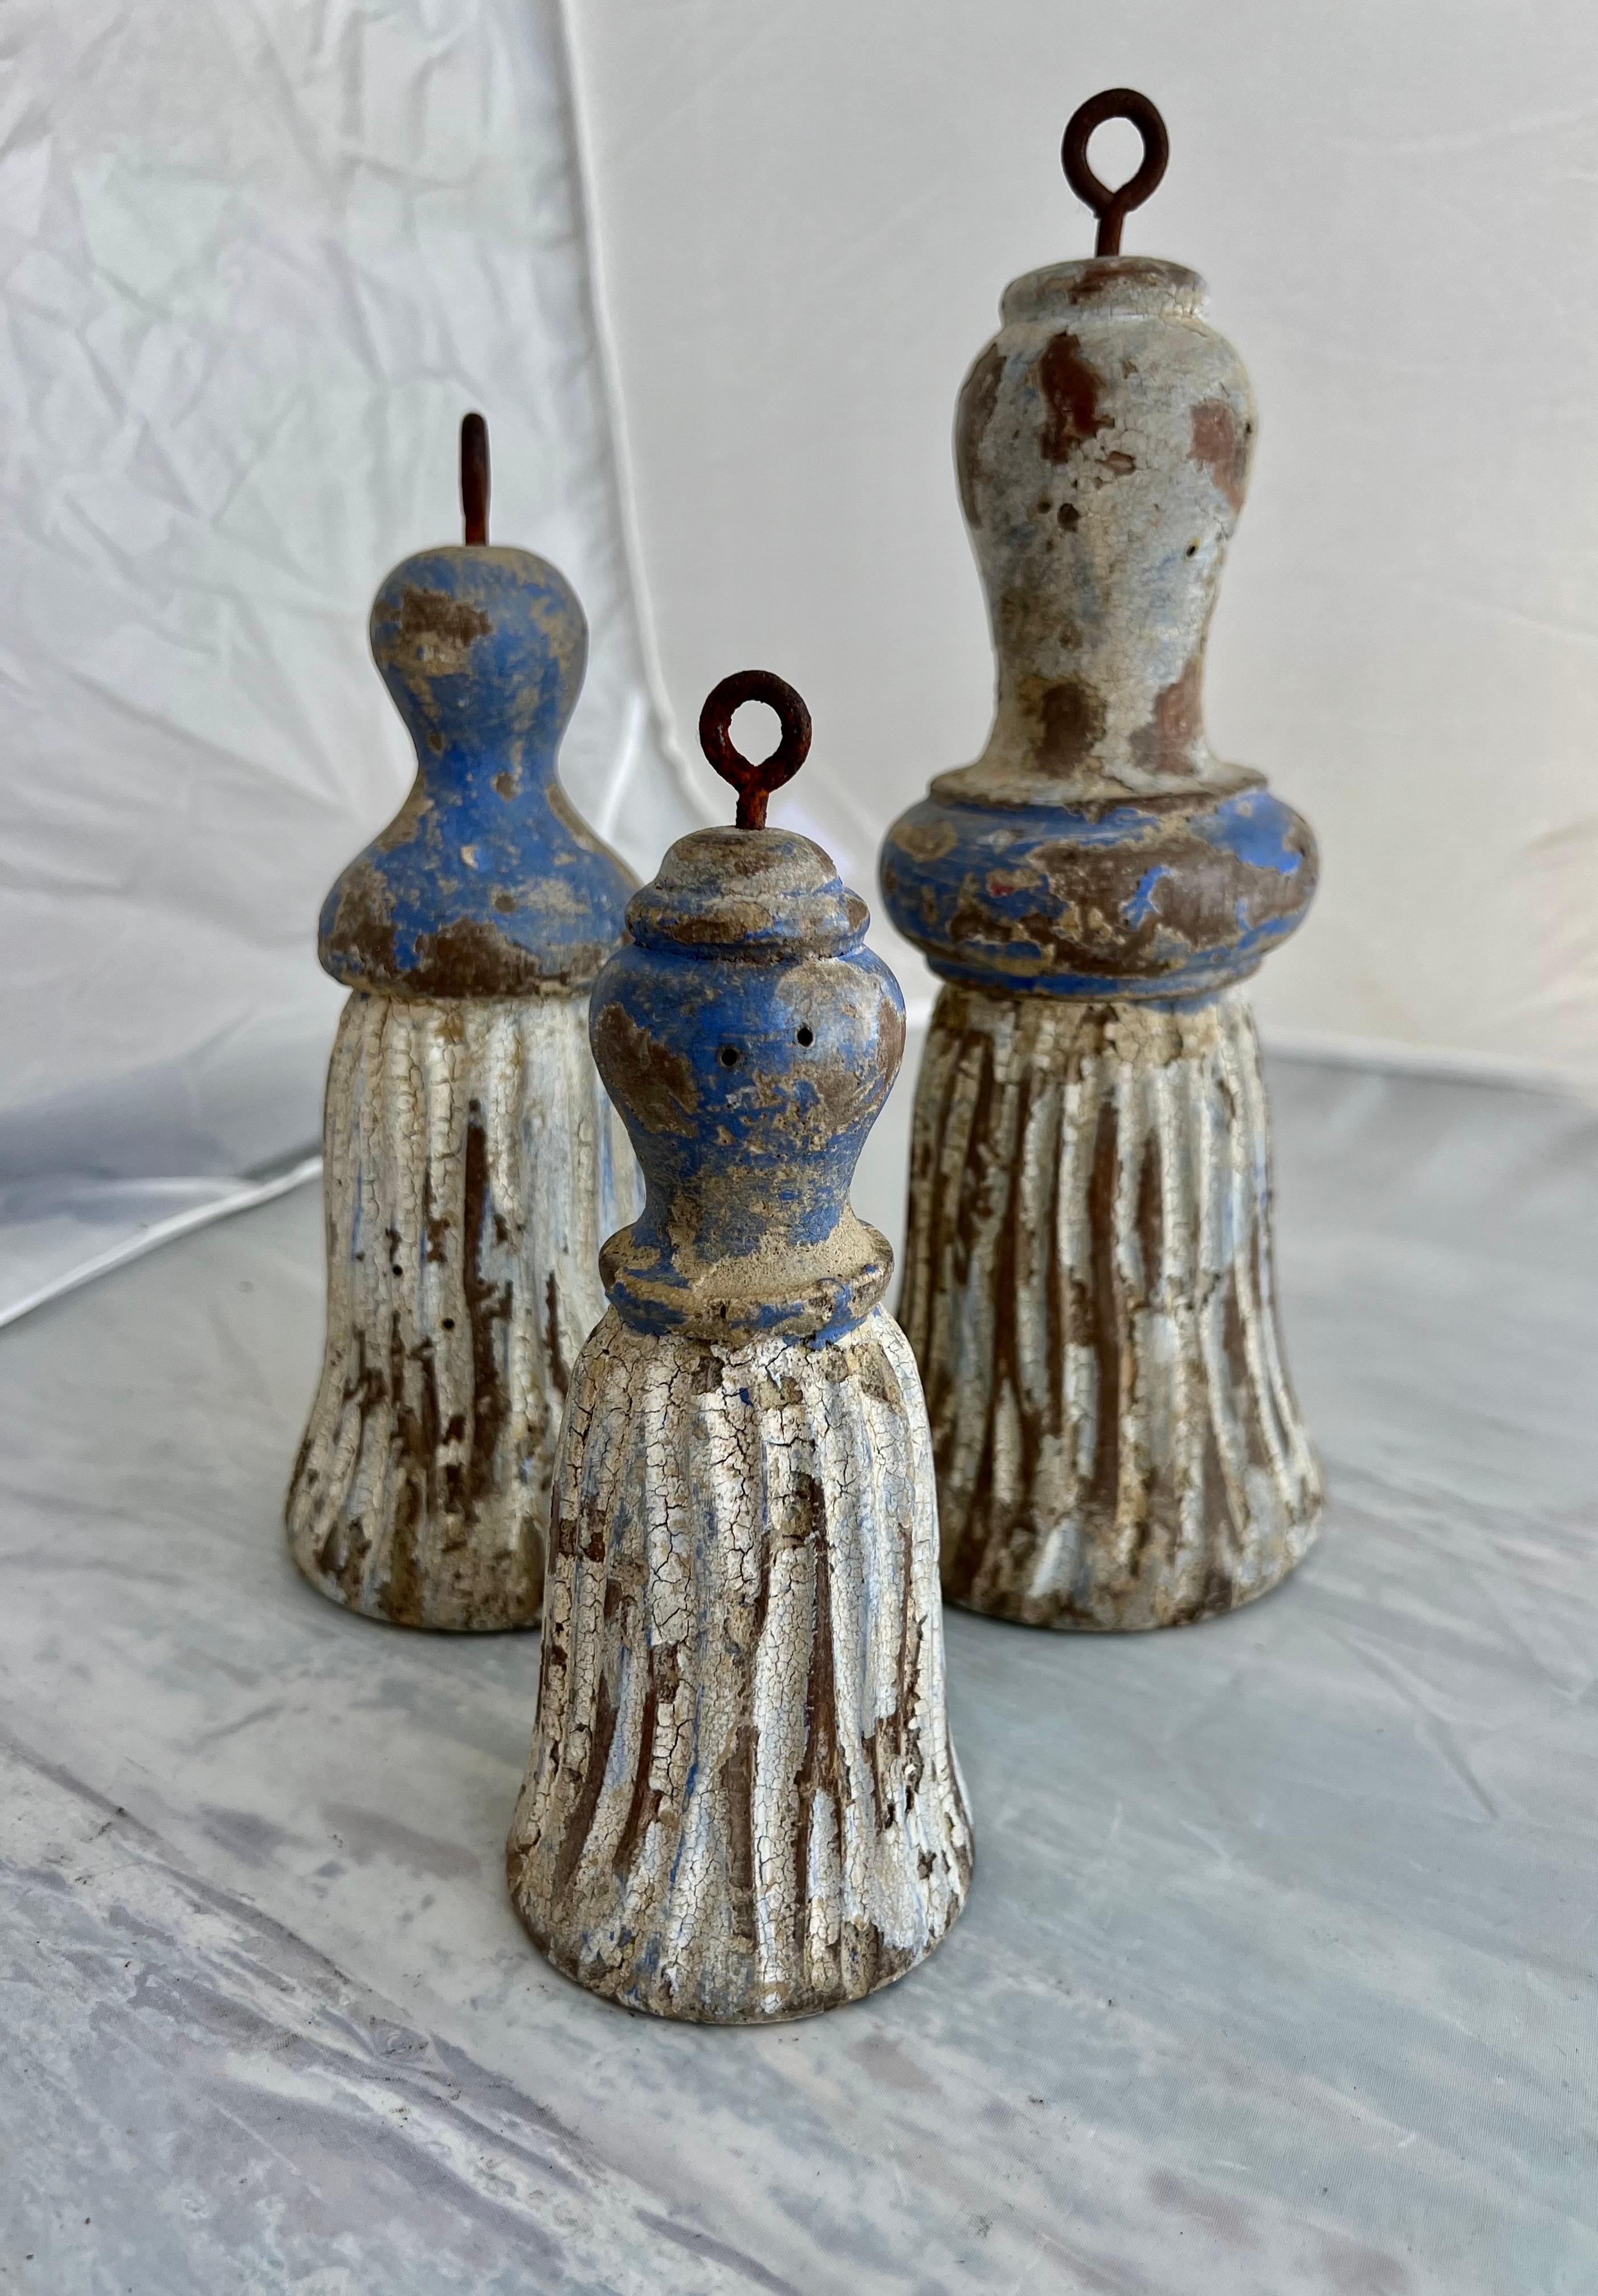 A set of three carved wood & painted tassels from Italy.  Their varying sizes would make them versatile for decorating bookshelves or end tables, adding a touch Italian craftsmanship to your space.

Size of tassels:

1) 4